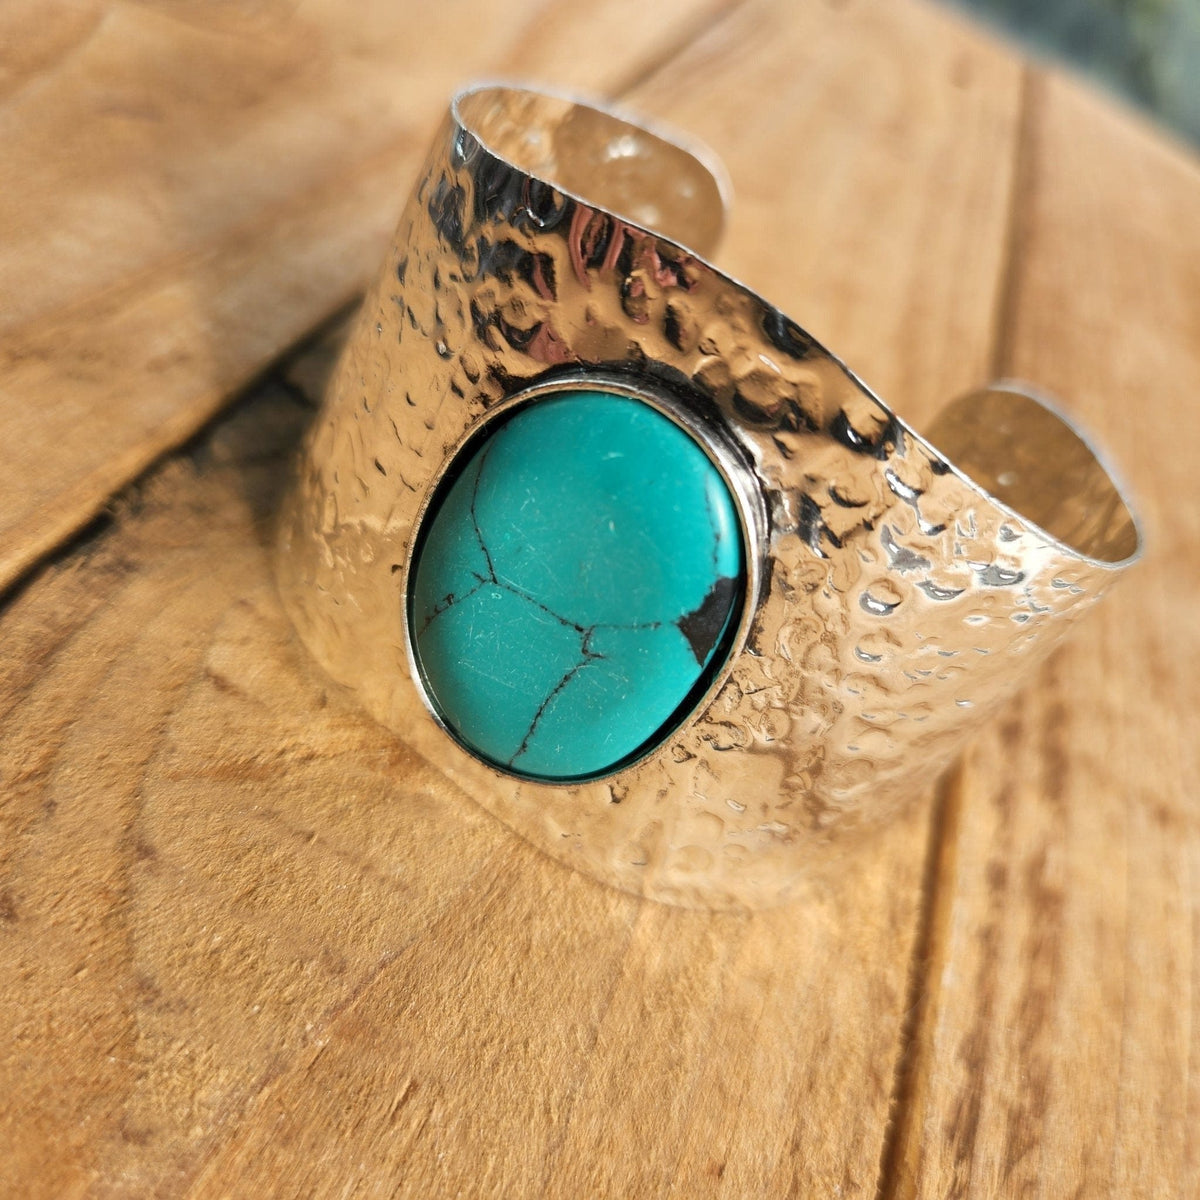 Large Silver Cuff Bracelet with Turquoise Stone Western Bracelet TheFringeCultureCollective